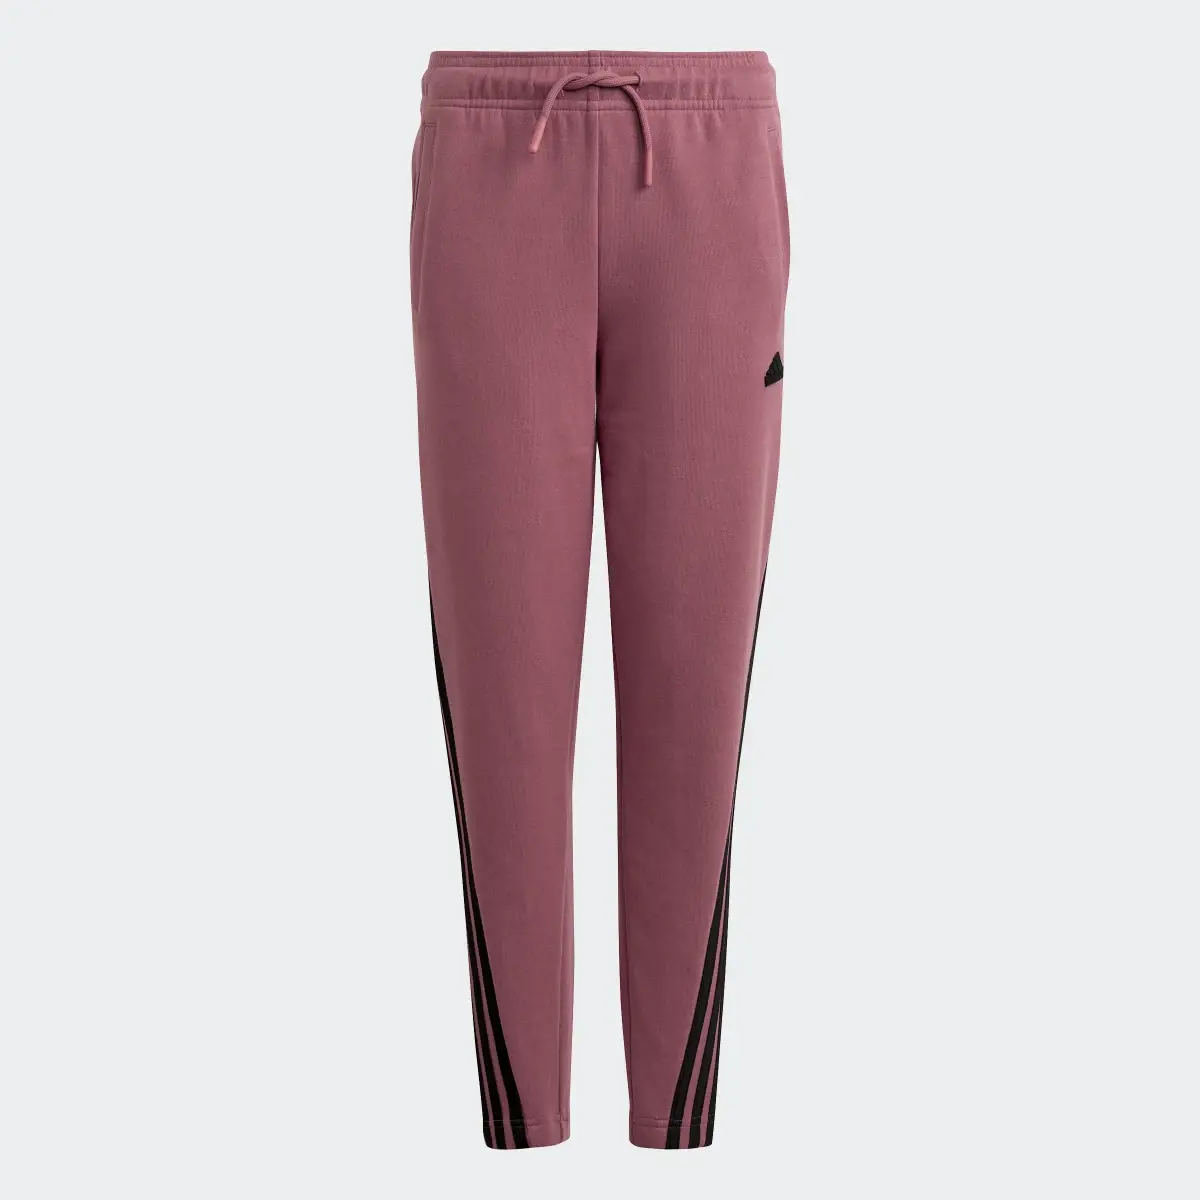 Adidas Future Icons 3-Stripes Ankle-Length Tracksuit Bottoms. 3